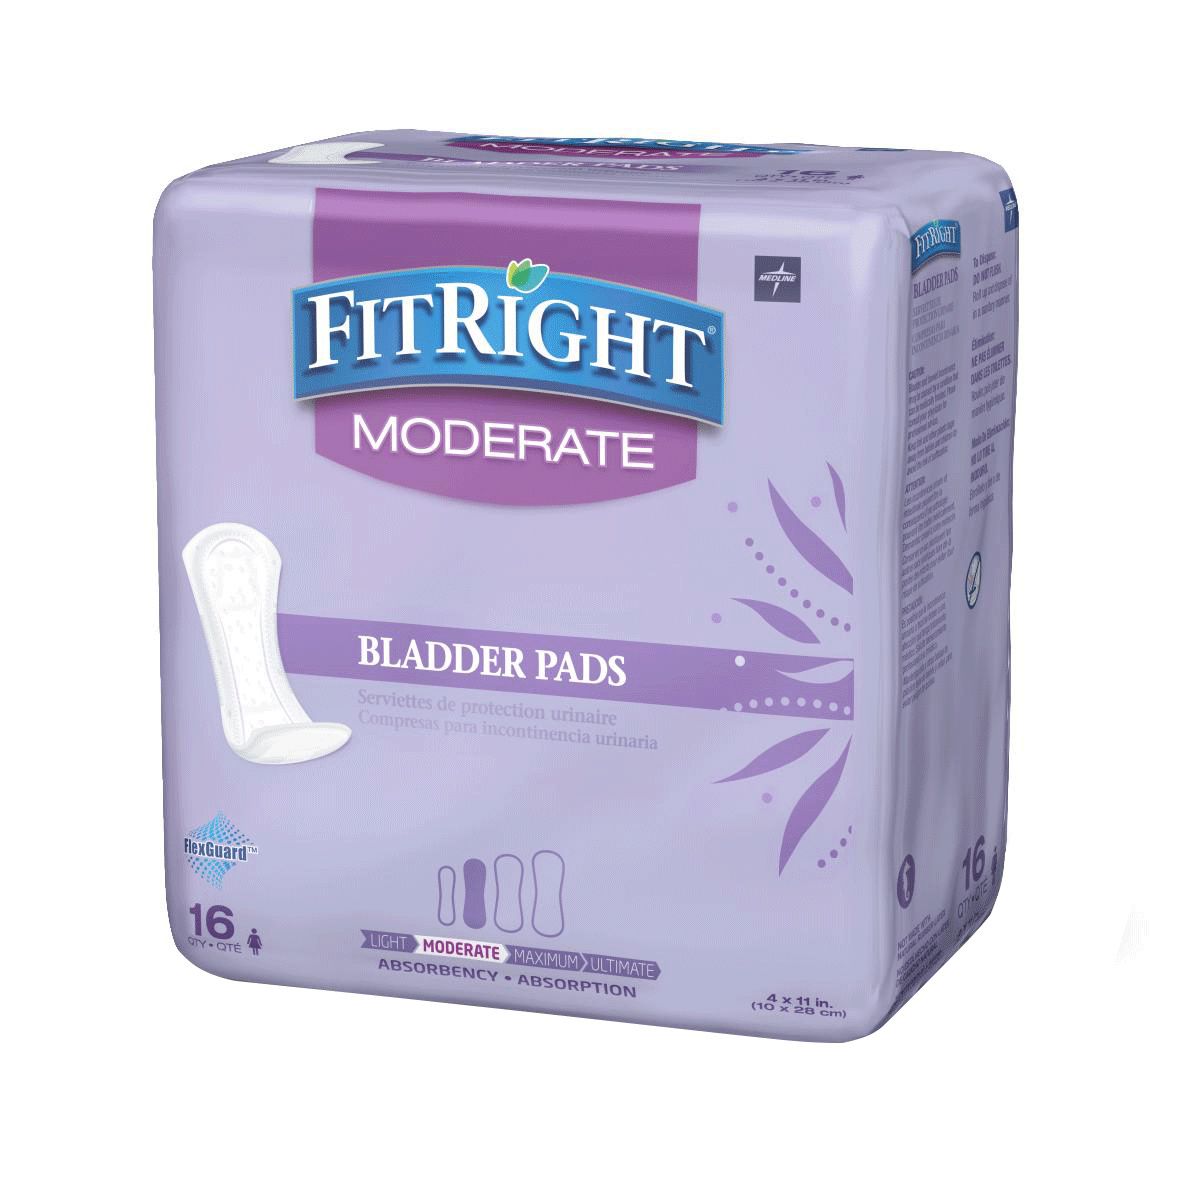 https://i.webareacontrol.com/fullimage/1000-X-1000/1/e/11102018558fitright-bladder-control-pads-moderate-L.png